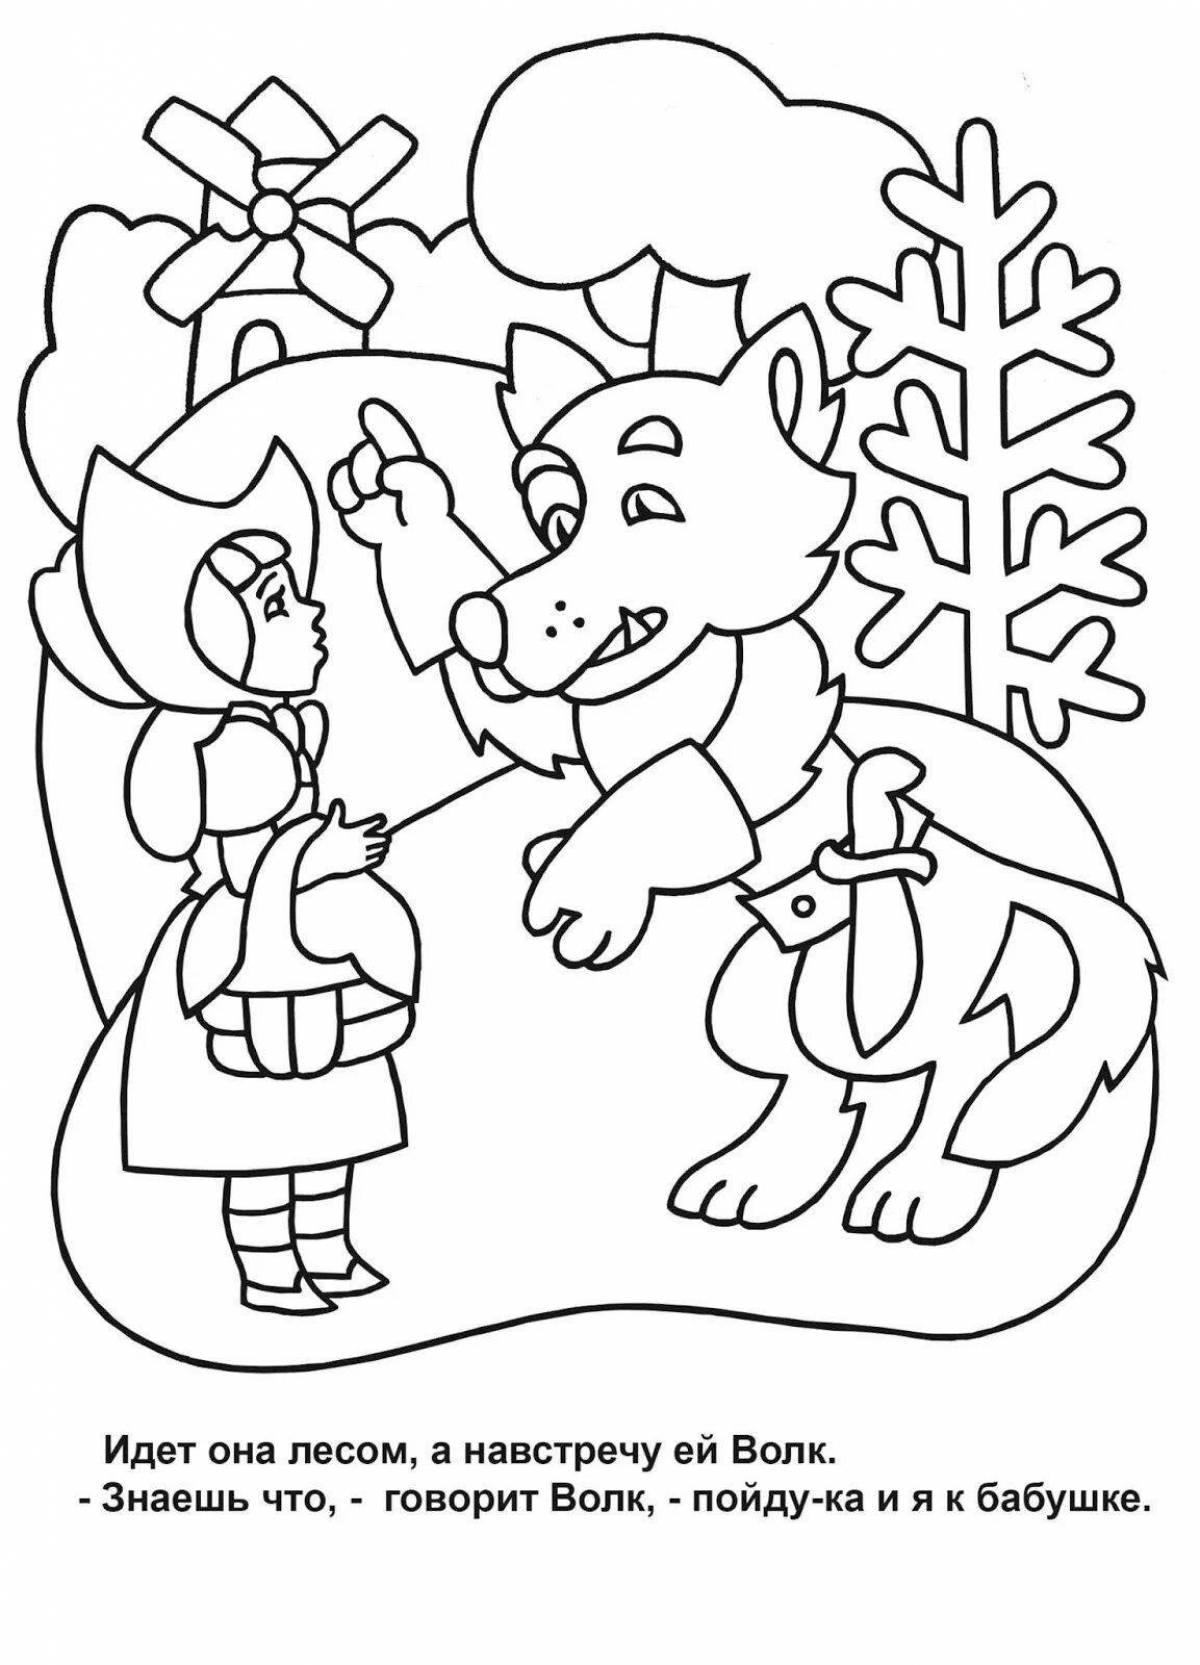 Coloring book playful fairy tale perro for preschoolers